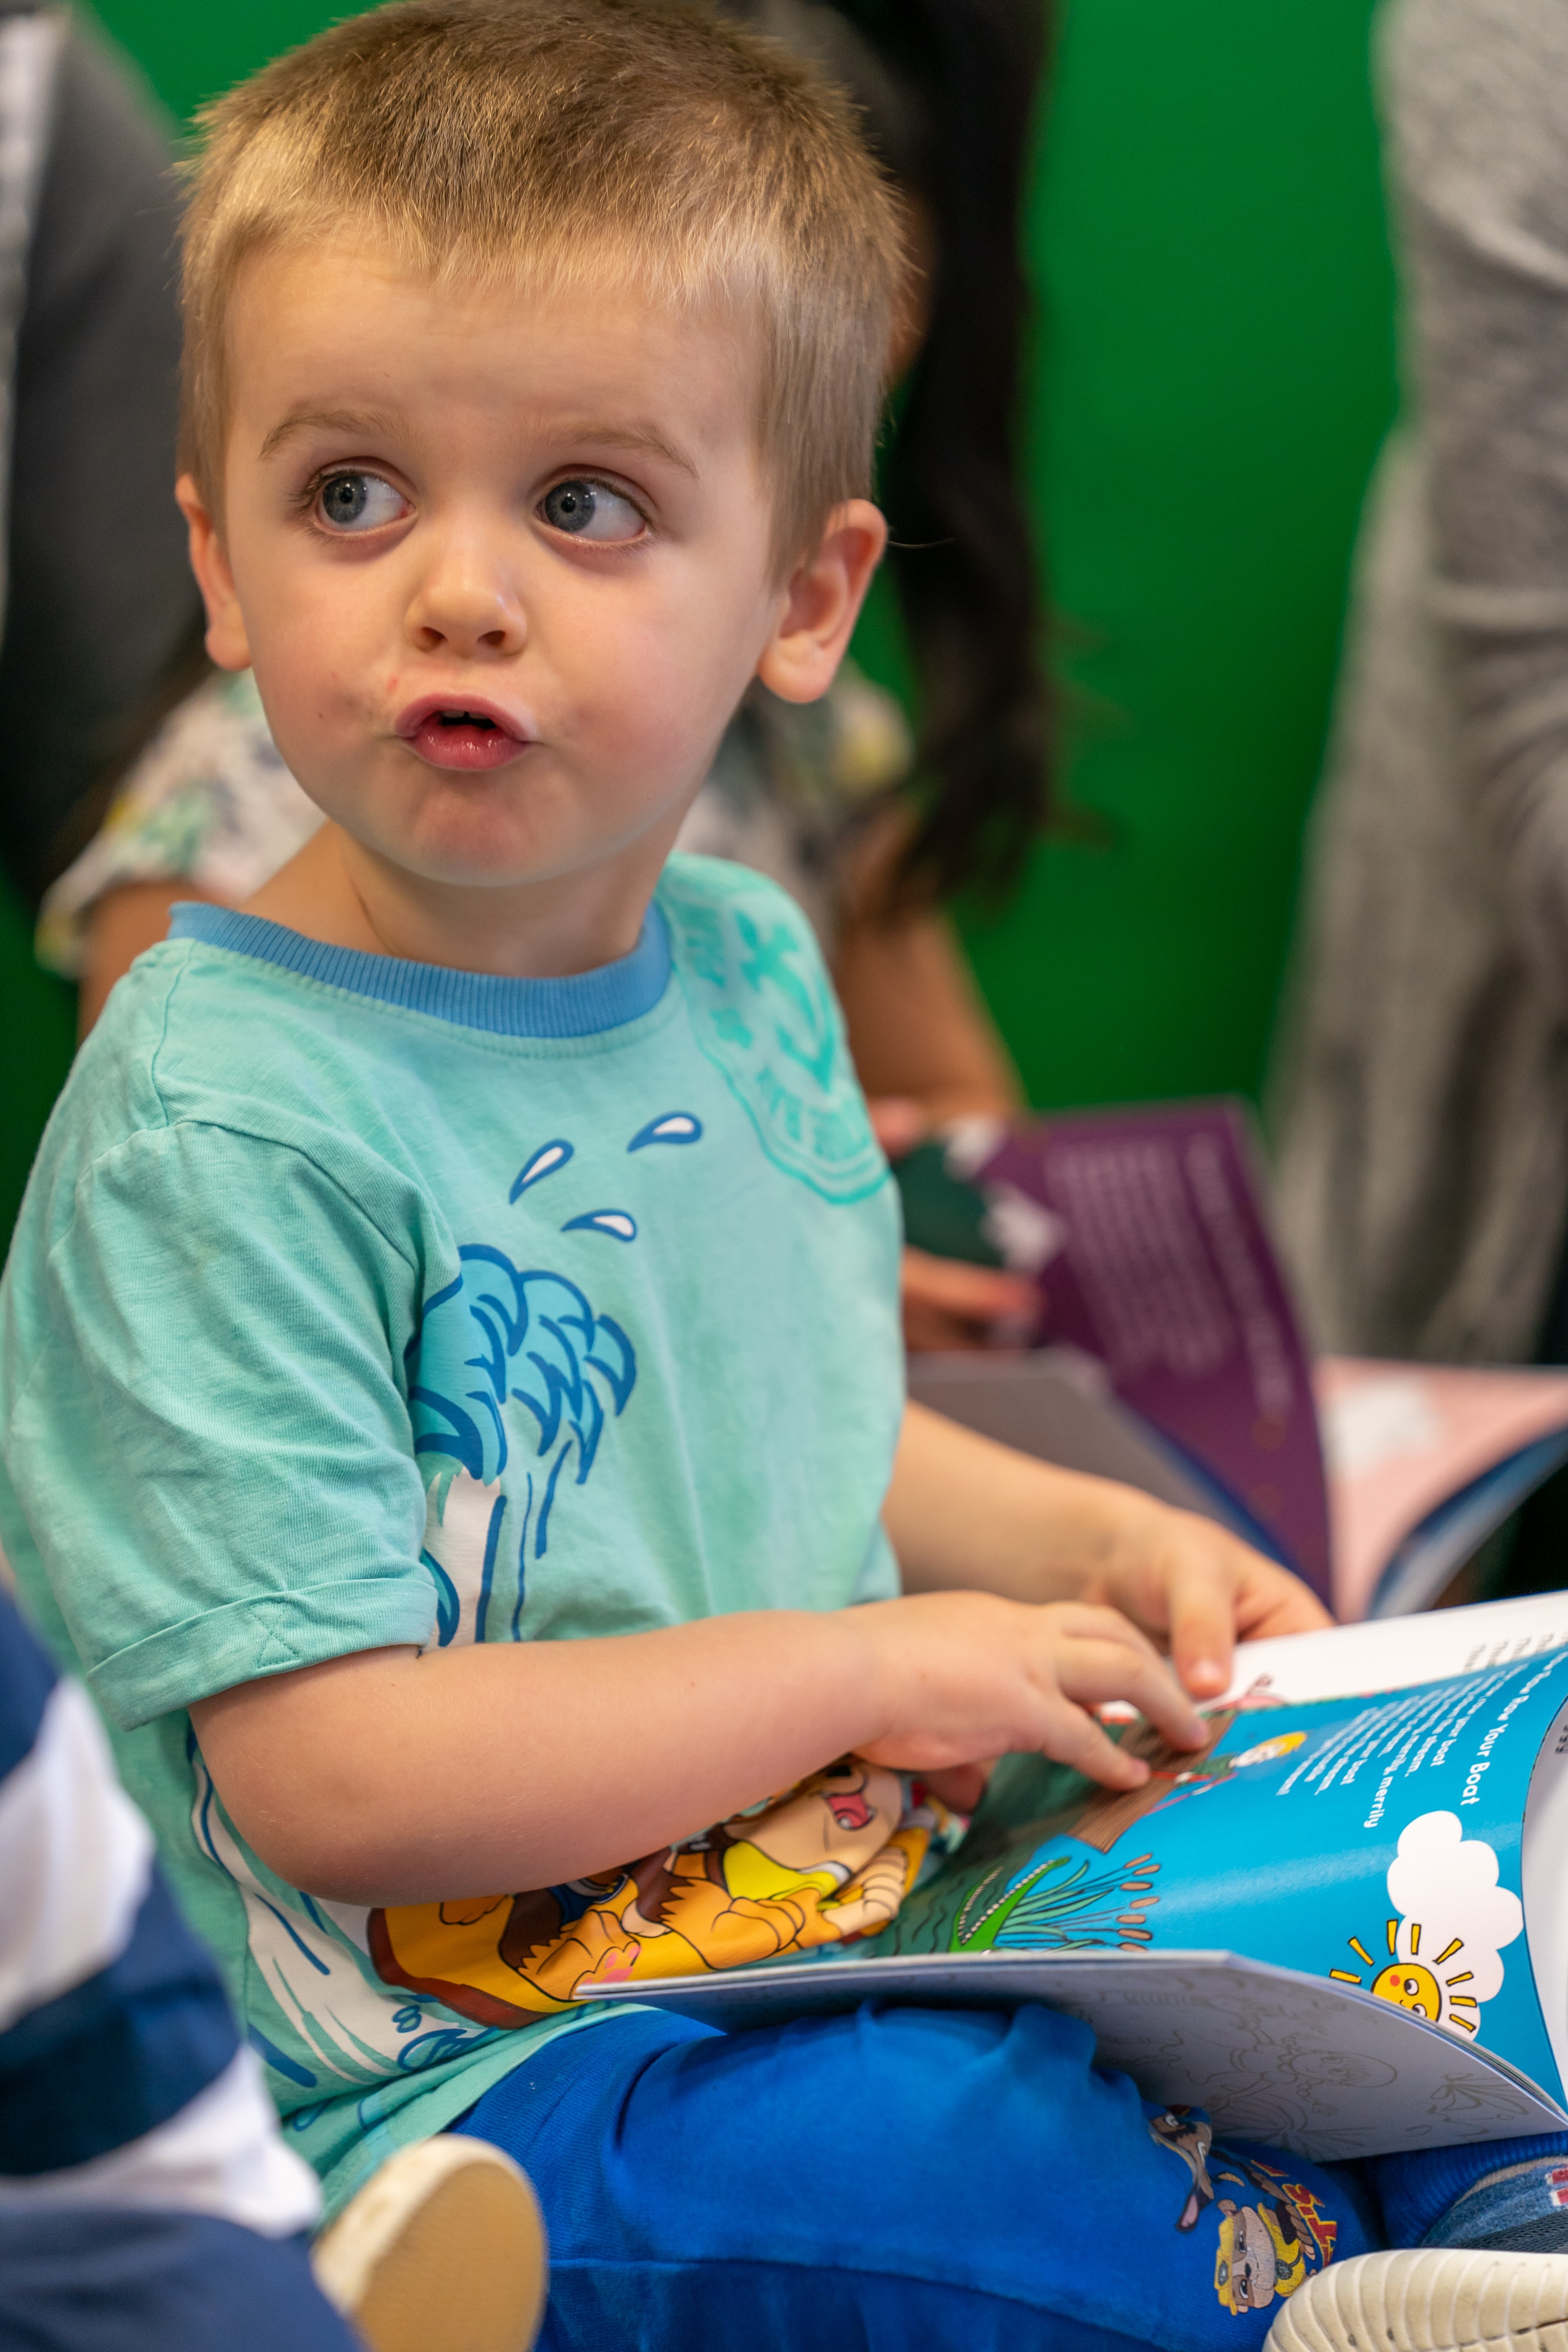 Toddler reading a book and making a funny face.